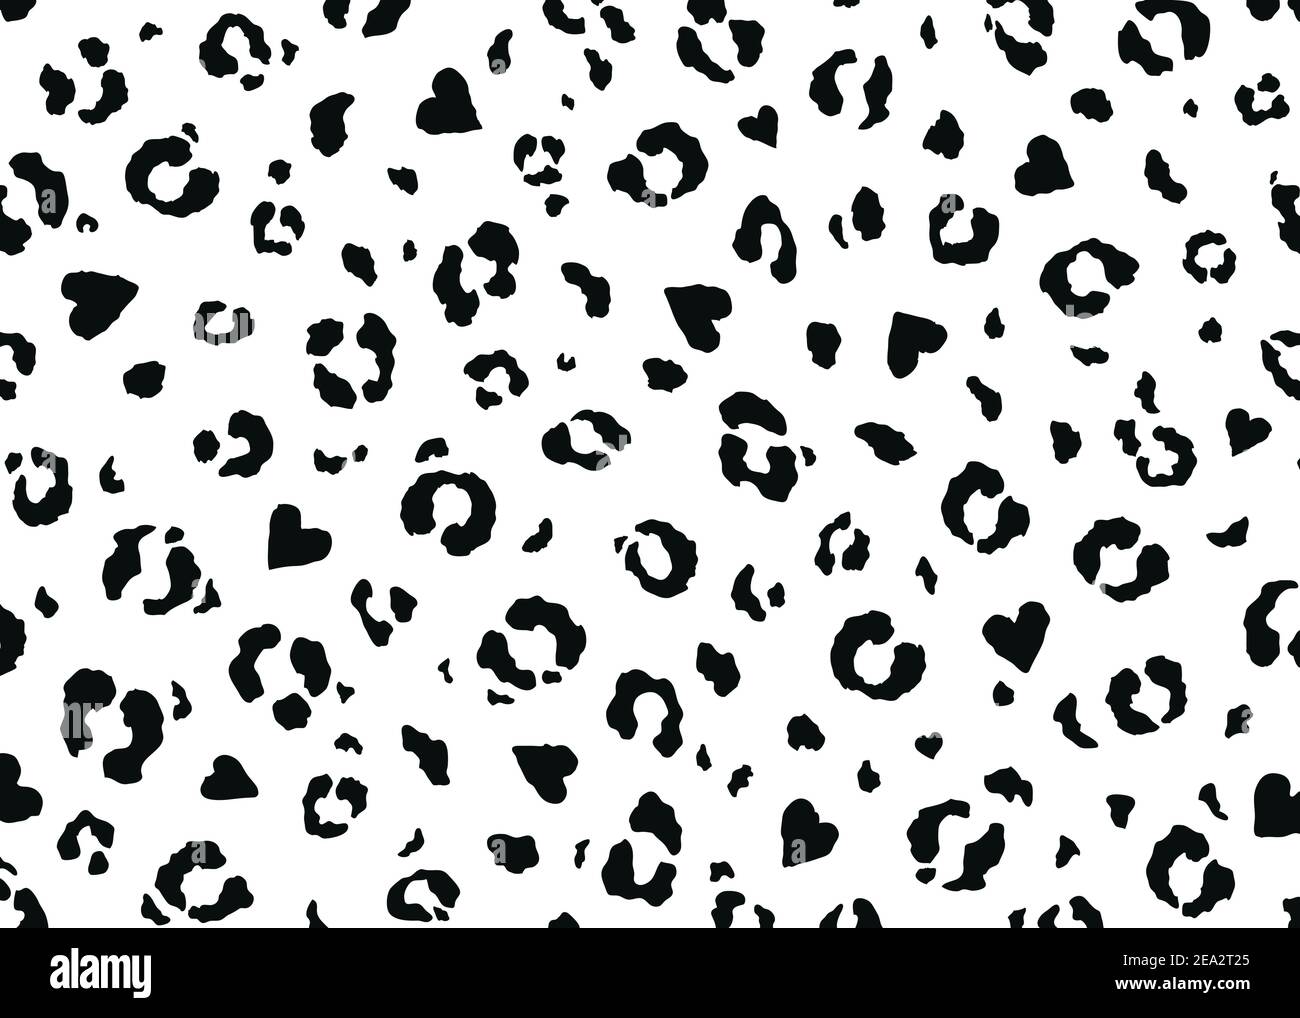 Leopard skin pattern design with abstract heart shapes. Vector illustration background. Wildlife fur skin design illustration. Stock Vector